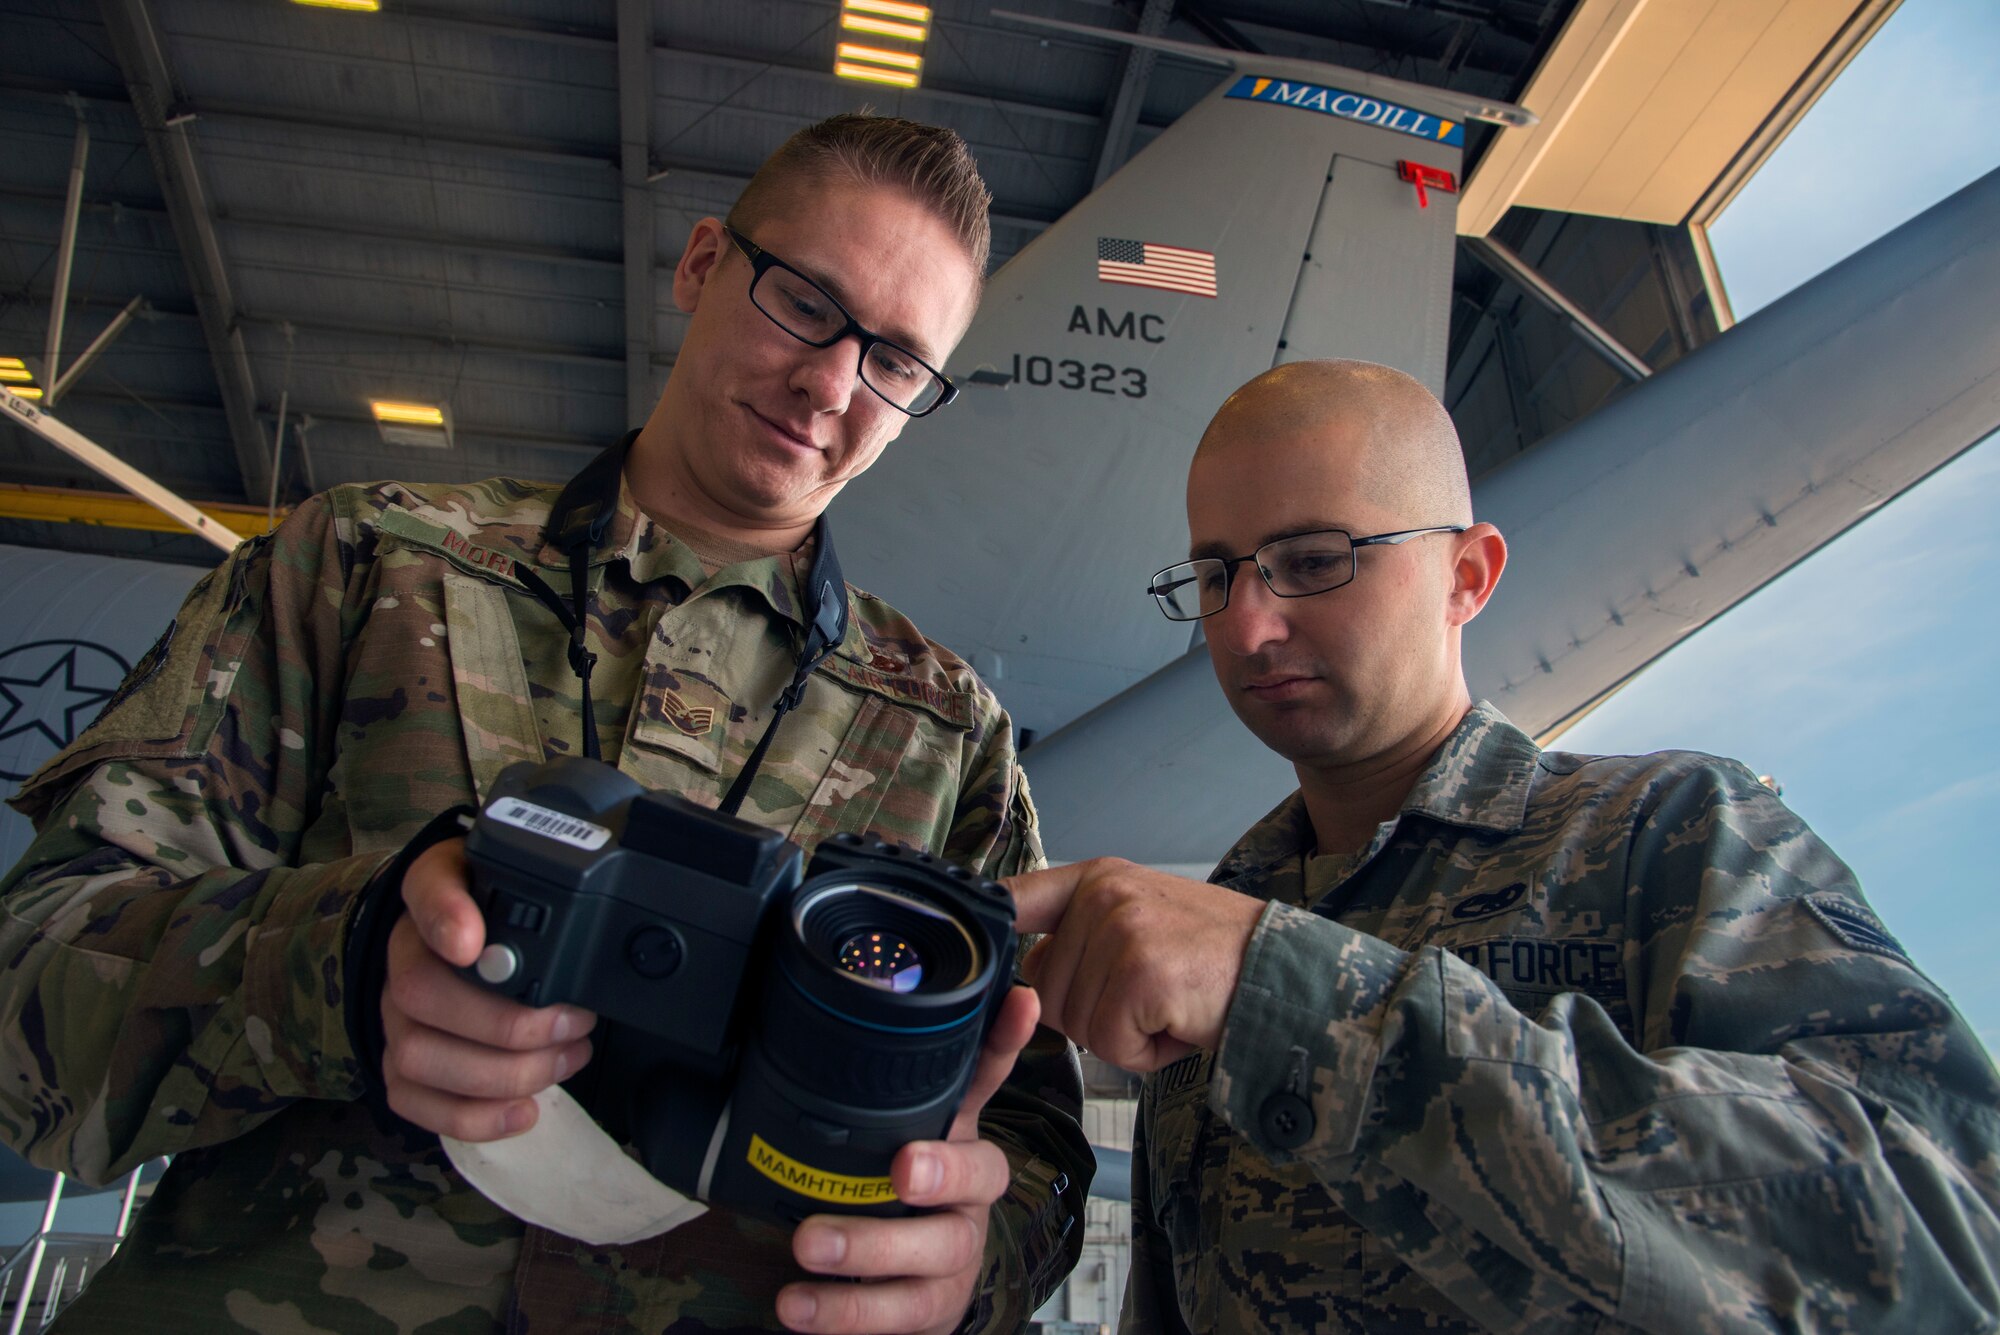 U.S. Air Force Staff Sgt. James Morin, a 6th Aircraft Maintenance thermography certified technician, and Senior Airman John Cuttito, a 6th Maintenance Squadron hydraulics systems journeyman, work together with a thermal imaging camera at MacDill Air Force Base, Fla., March 1, 2019.